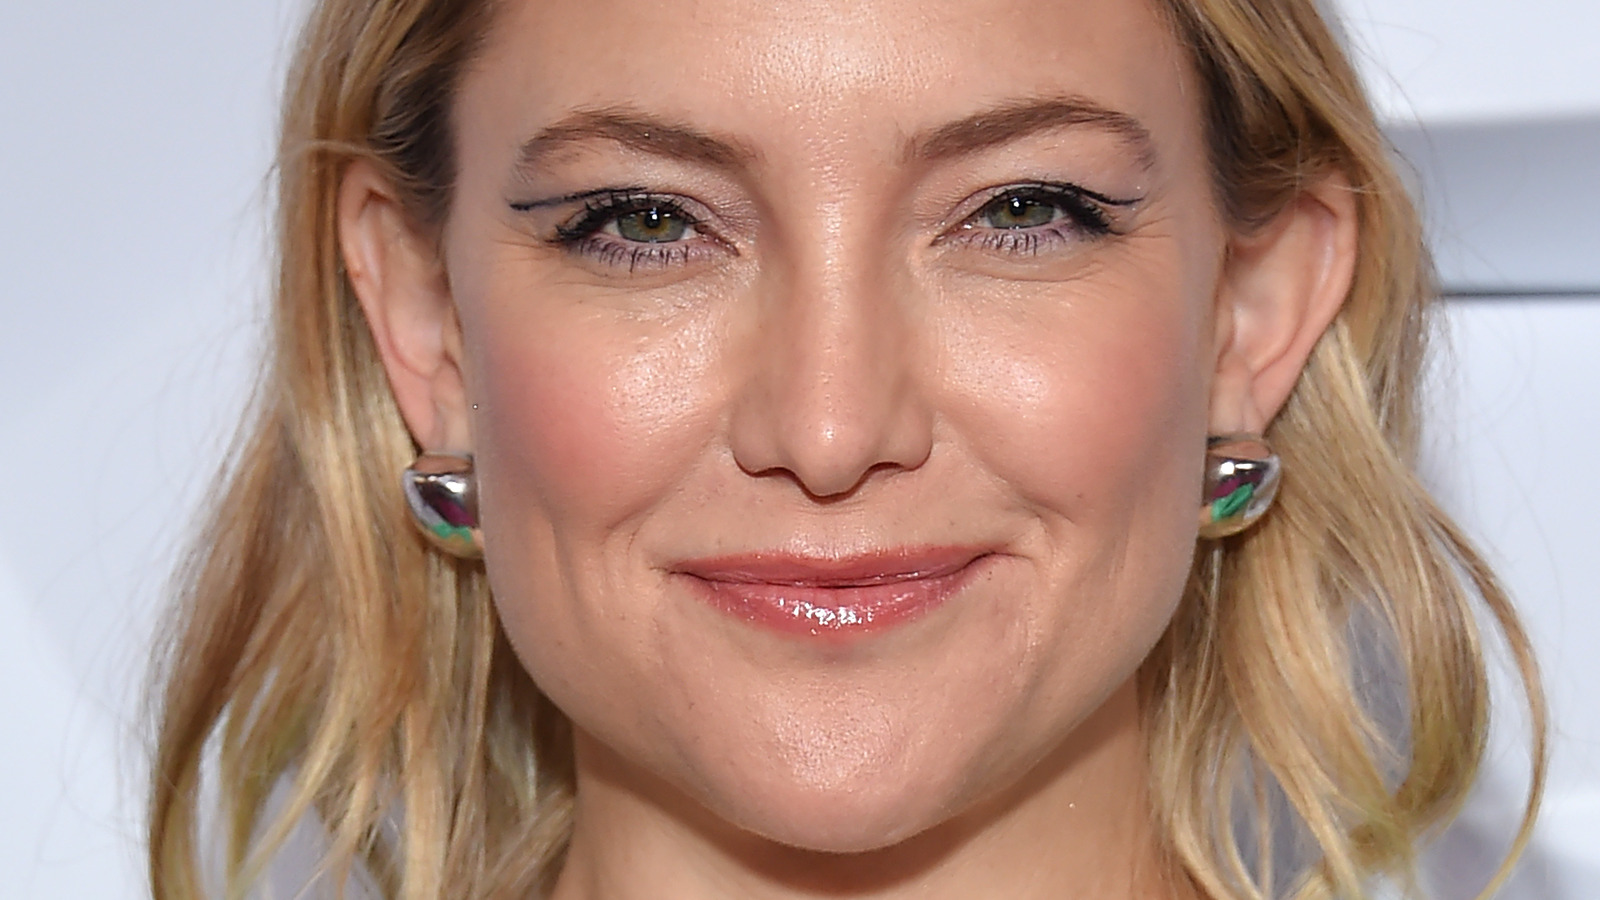 Kate Hudson's son Ryder is dating Judd Apatow's daughter Iris -- See the  sweet pic